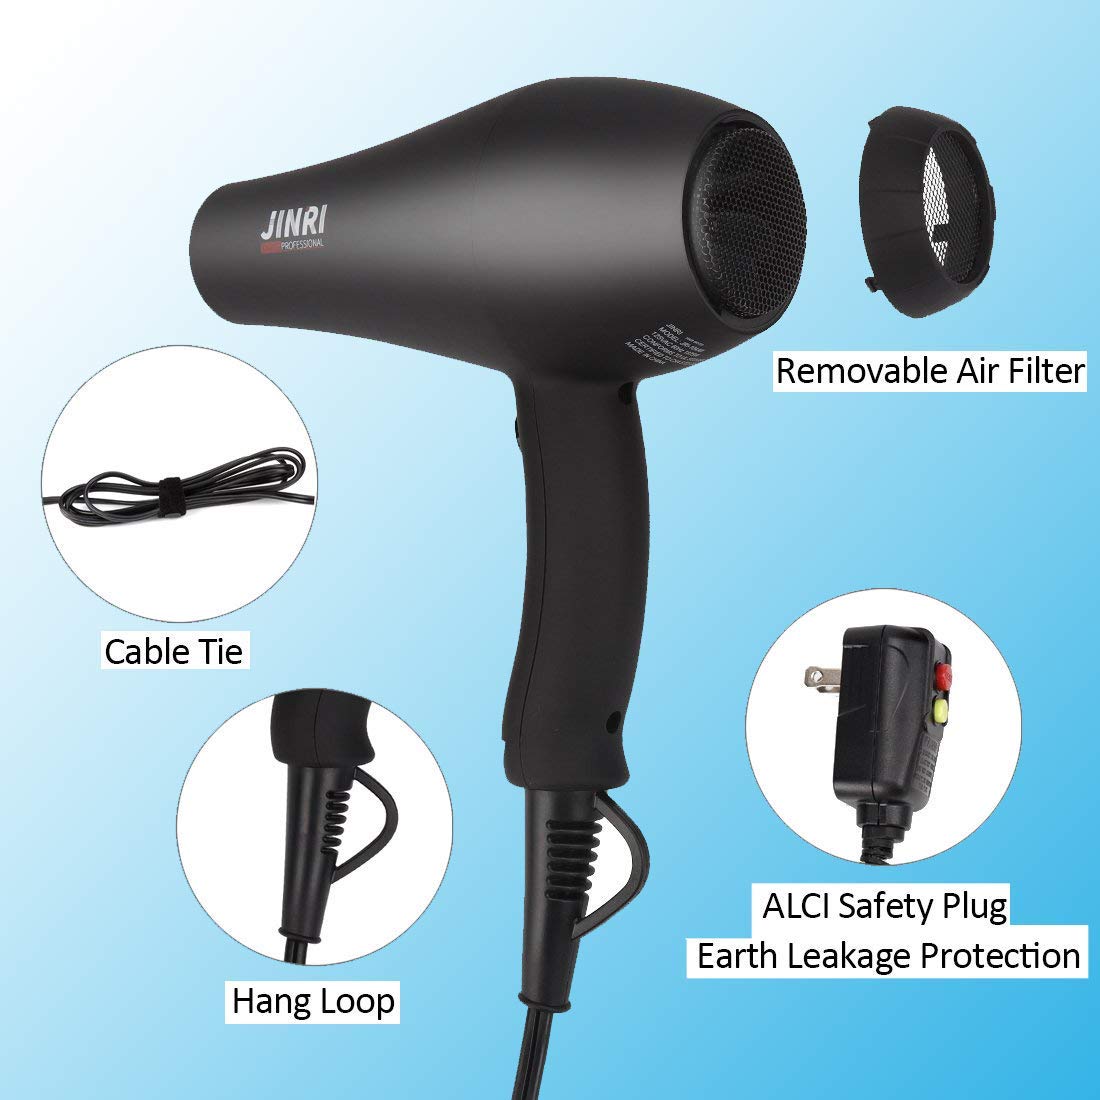 ???????????????????????????????? ???????????????? ????????????????????, Professional Salon Negative Ionic Blow Dryers for Fast Drying, Pro Ion Quiet Hairdryer with Diffuser & Concentrator & Comb